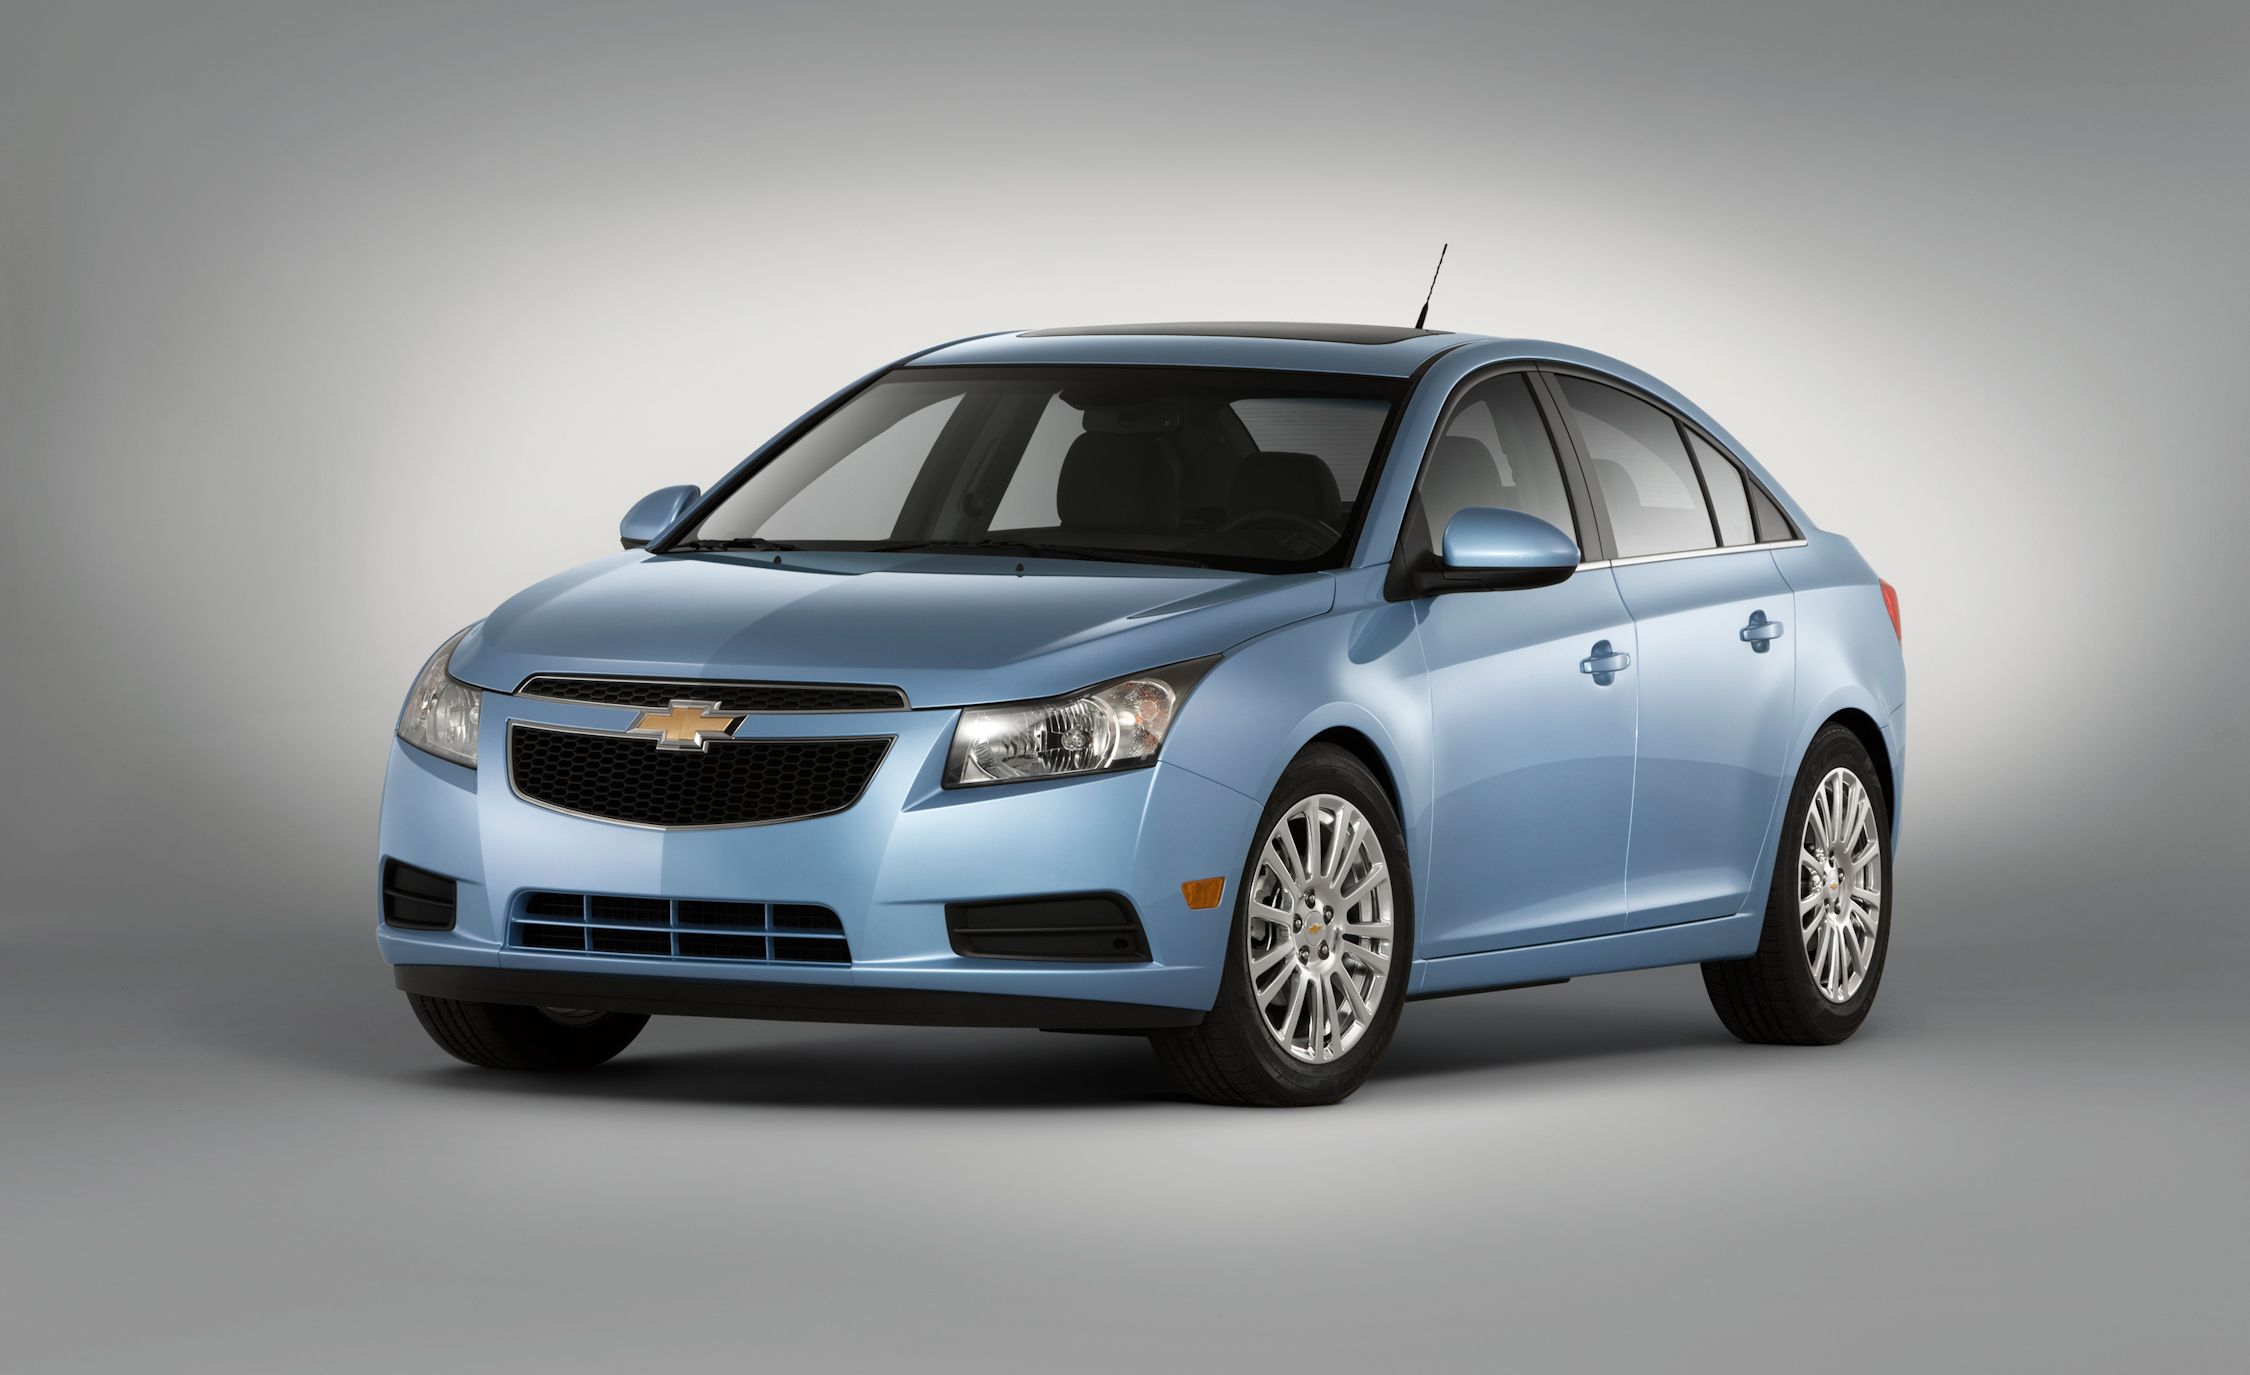 2011 Chevrolet Cruze Eco Drive: Chevy Cruze Review – Car and Driver